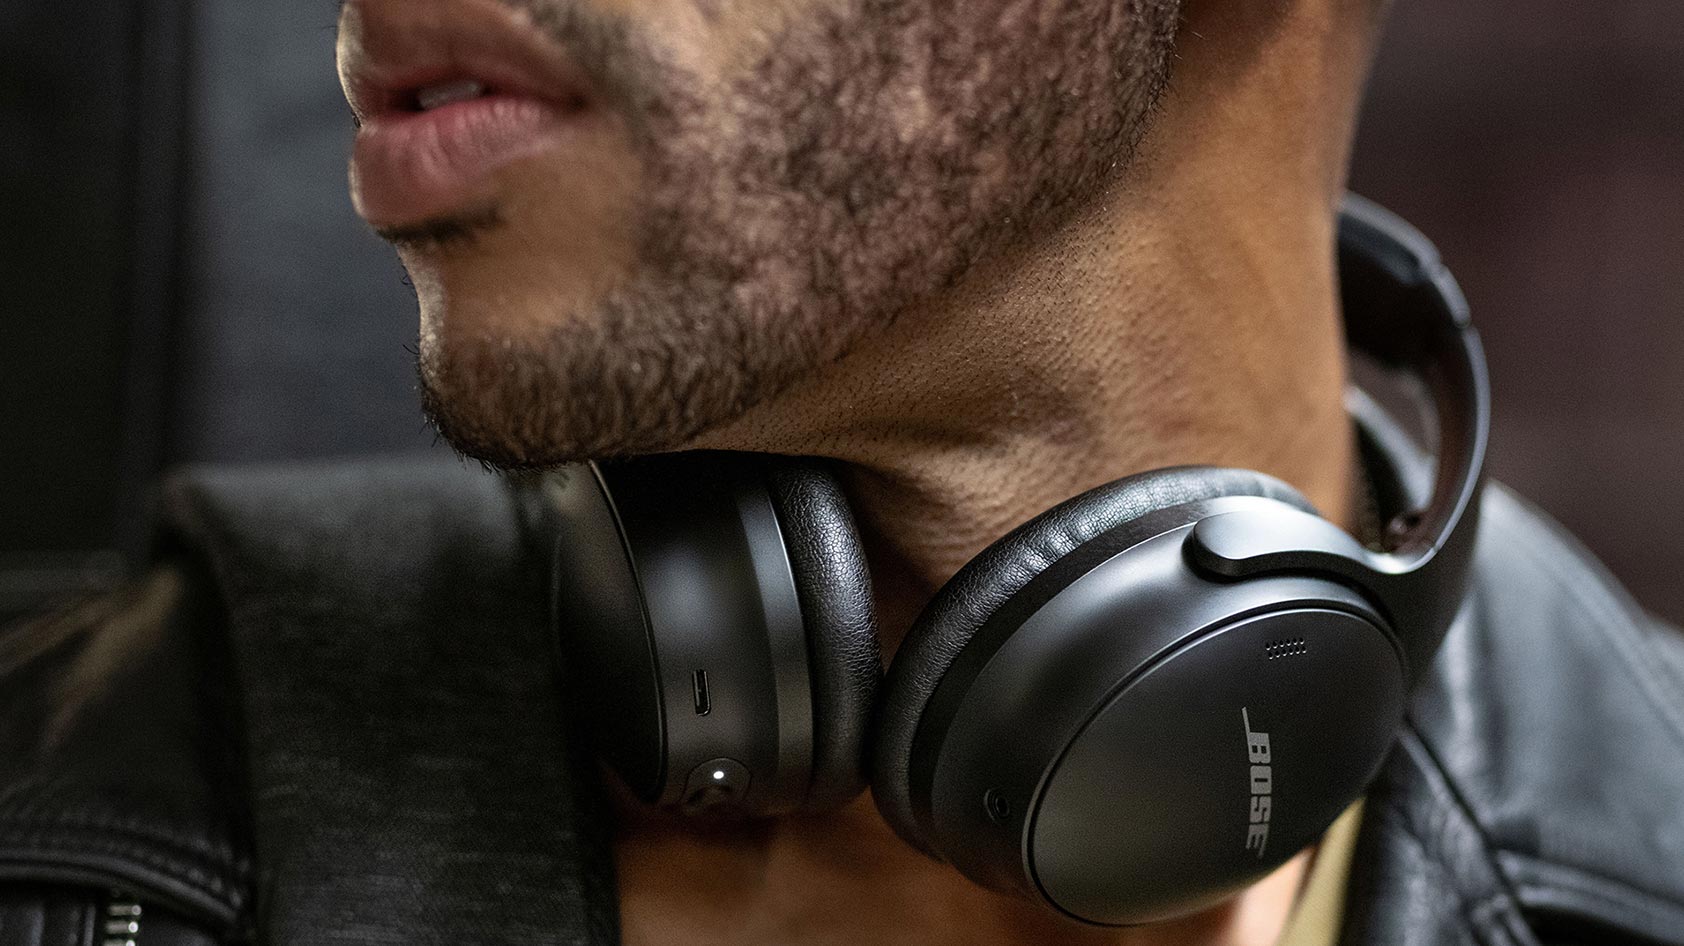 A man wears the Bose QuietComfort 45 noise-cancelling headphones in black around his neck.